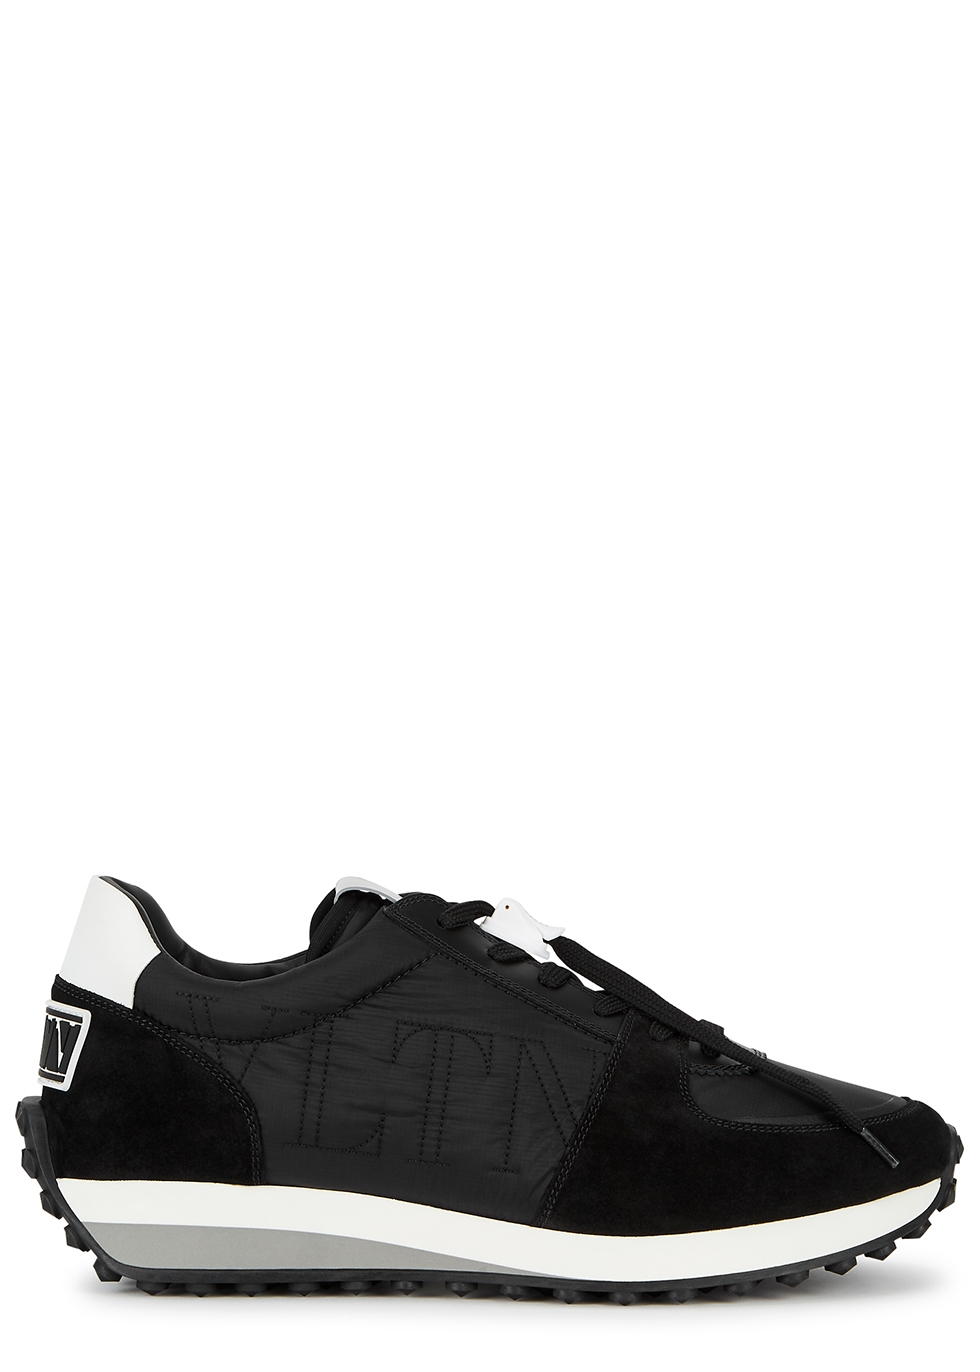 valentino shoes all black